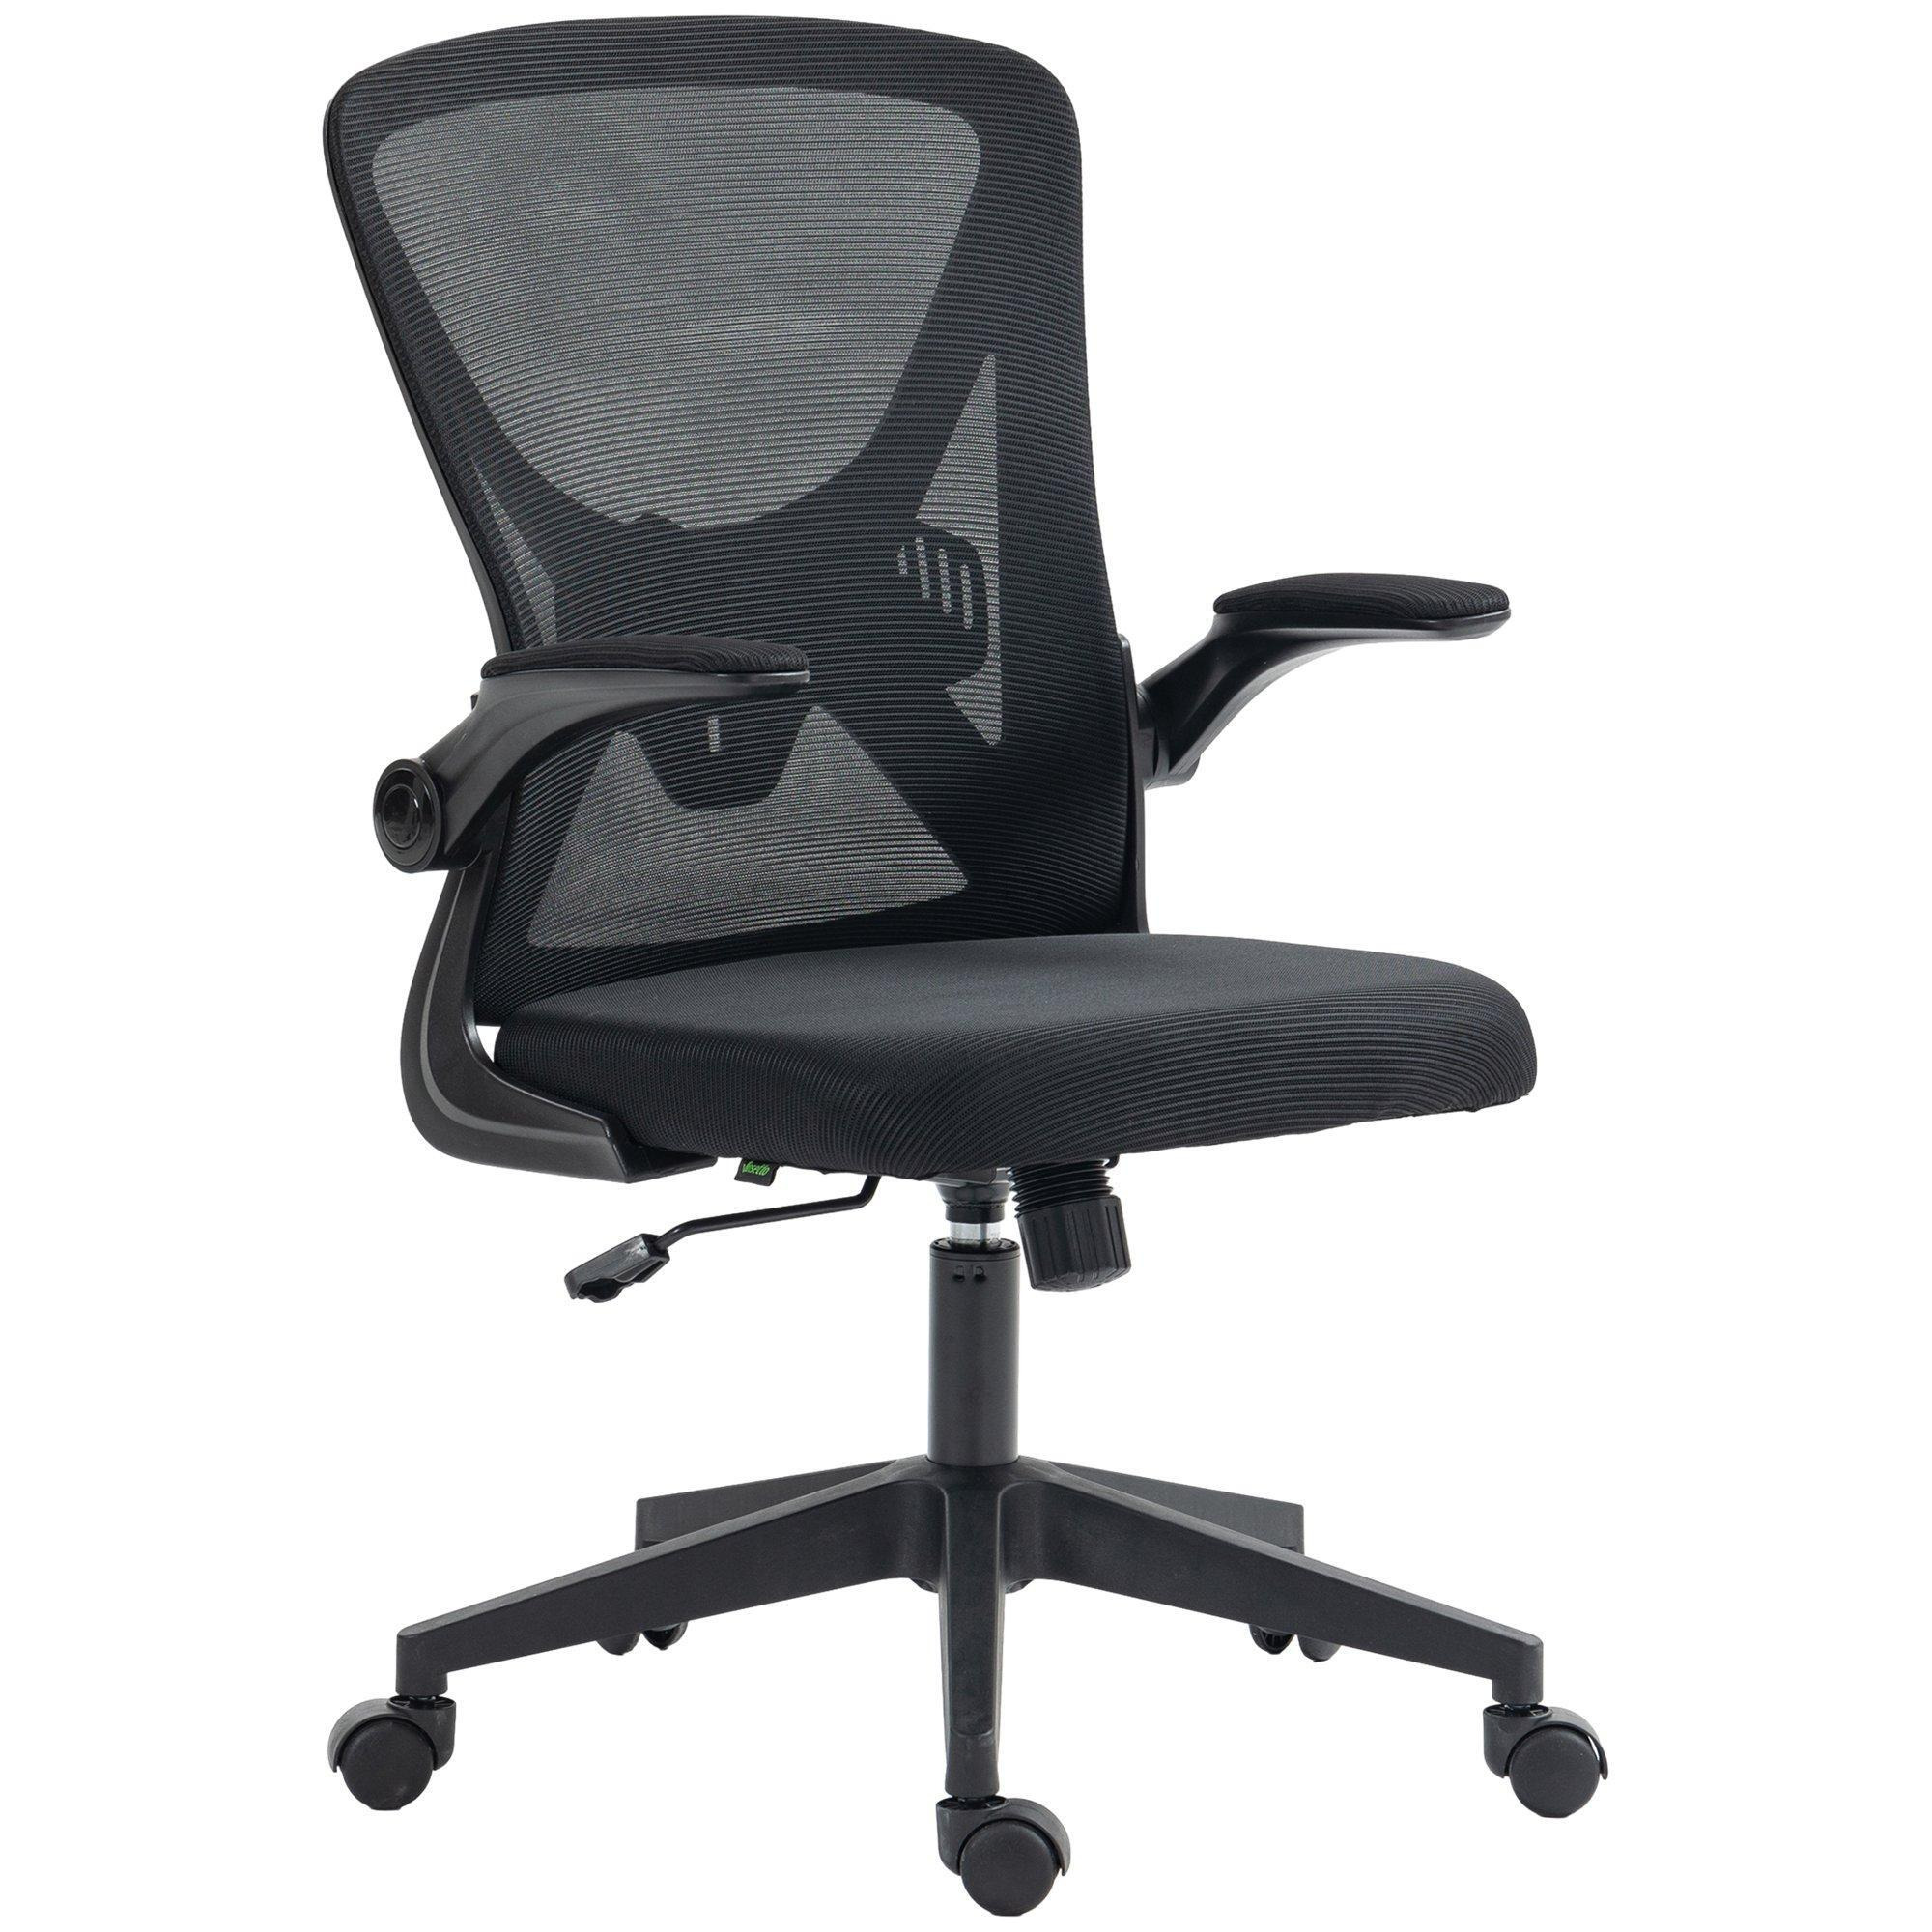 Ergonomic Mesh Office Chair with Flip up Armrests Lumbar Back Support - image 1